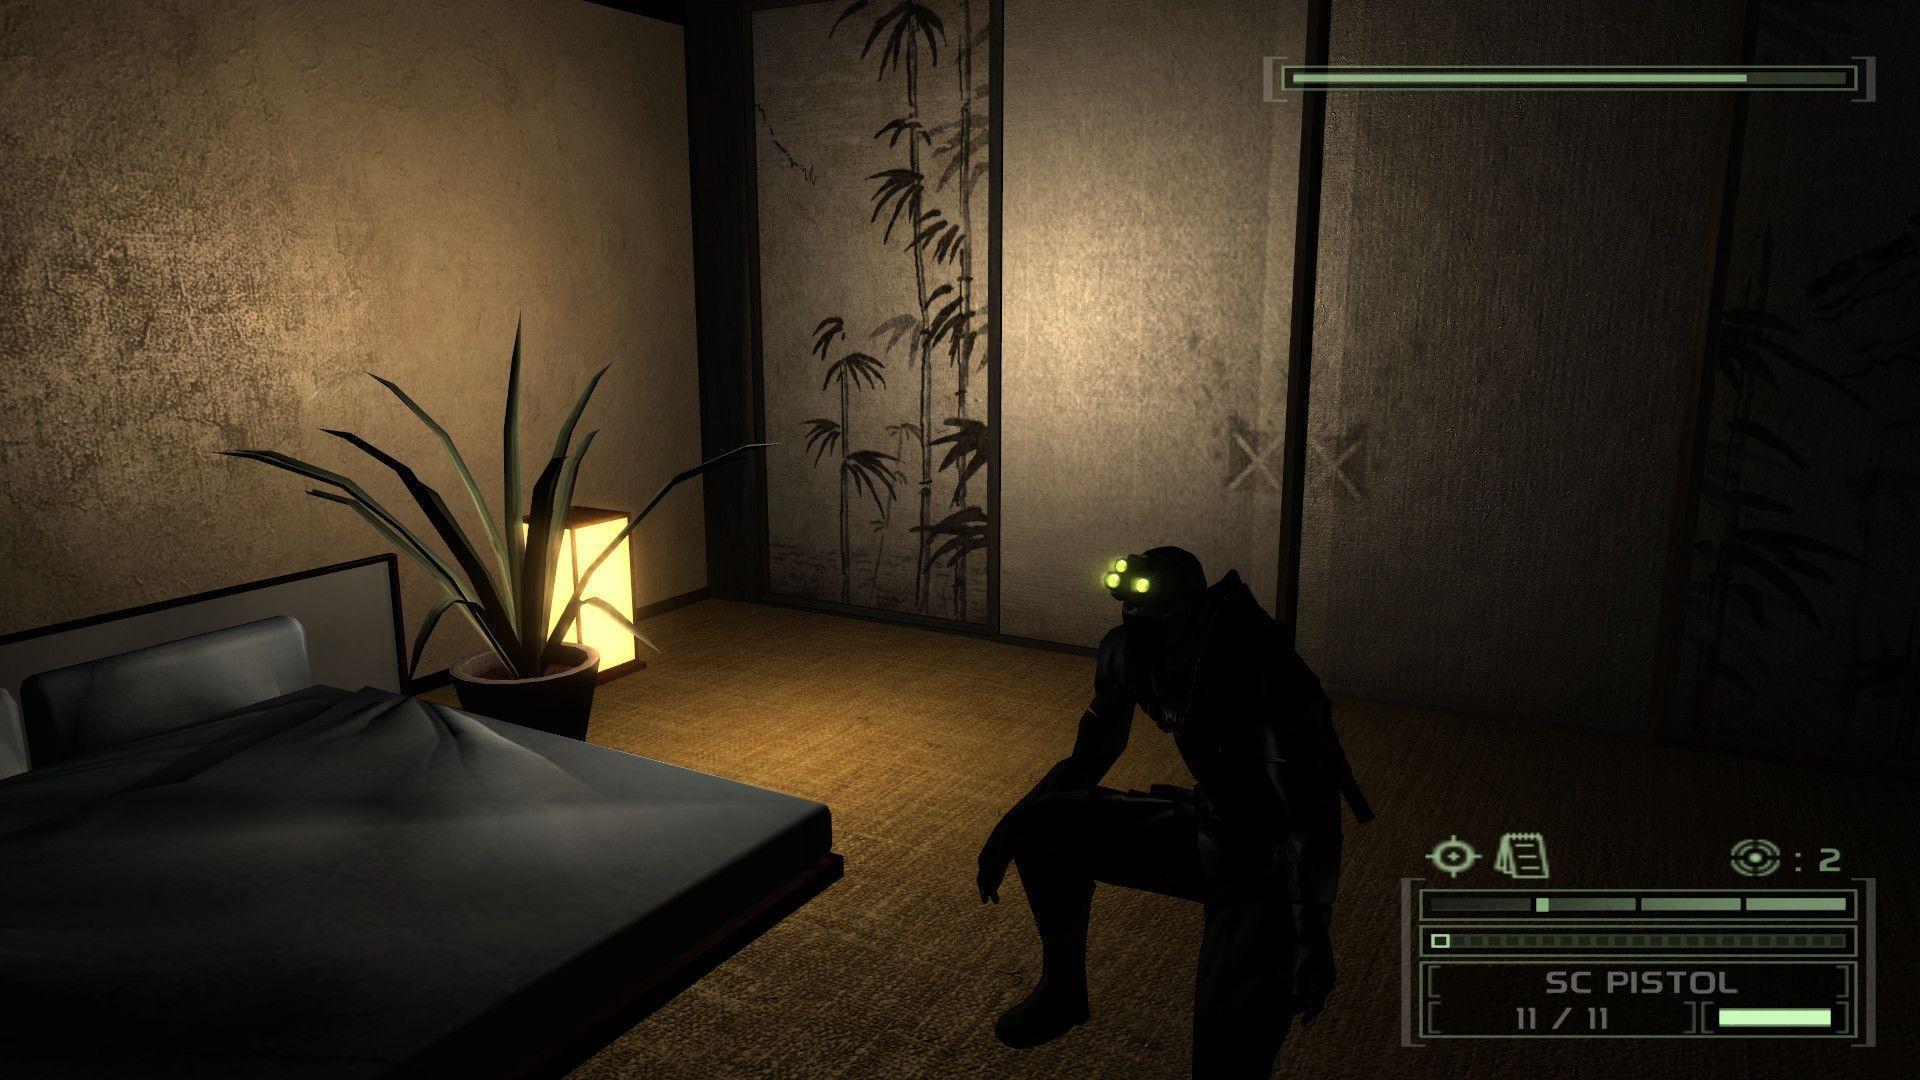 image For > Splinter Cell Chaos Theory Screenshot